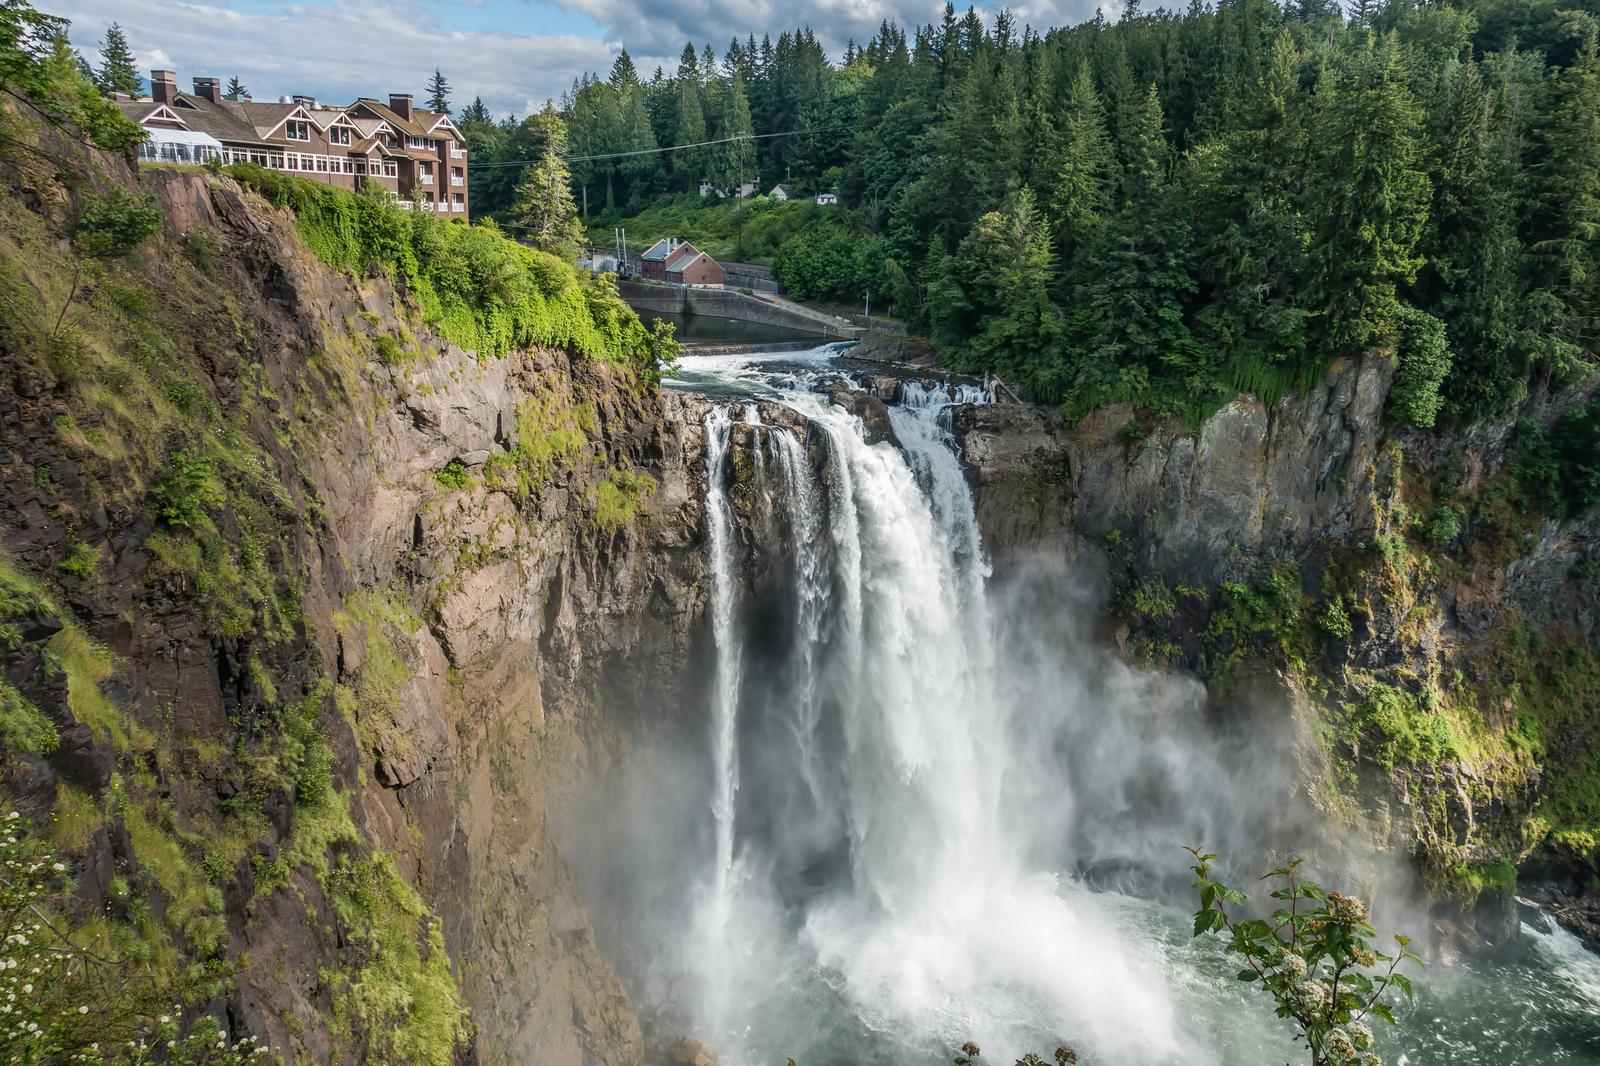 Are You a World Traveler? Test Your Knowledge by Matching These Majestic Natural Sites to Their Countries! Snoqualmie Falls 5